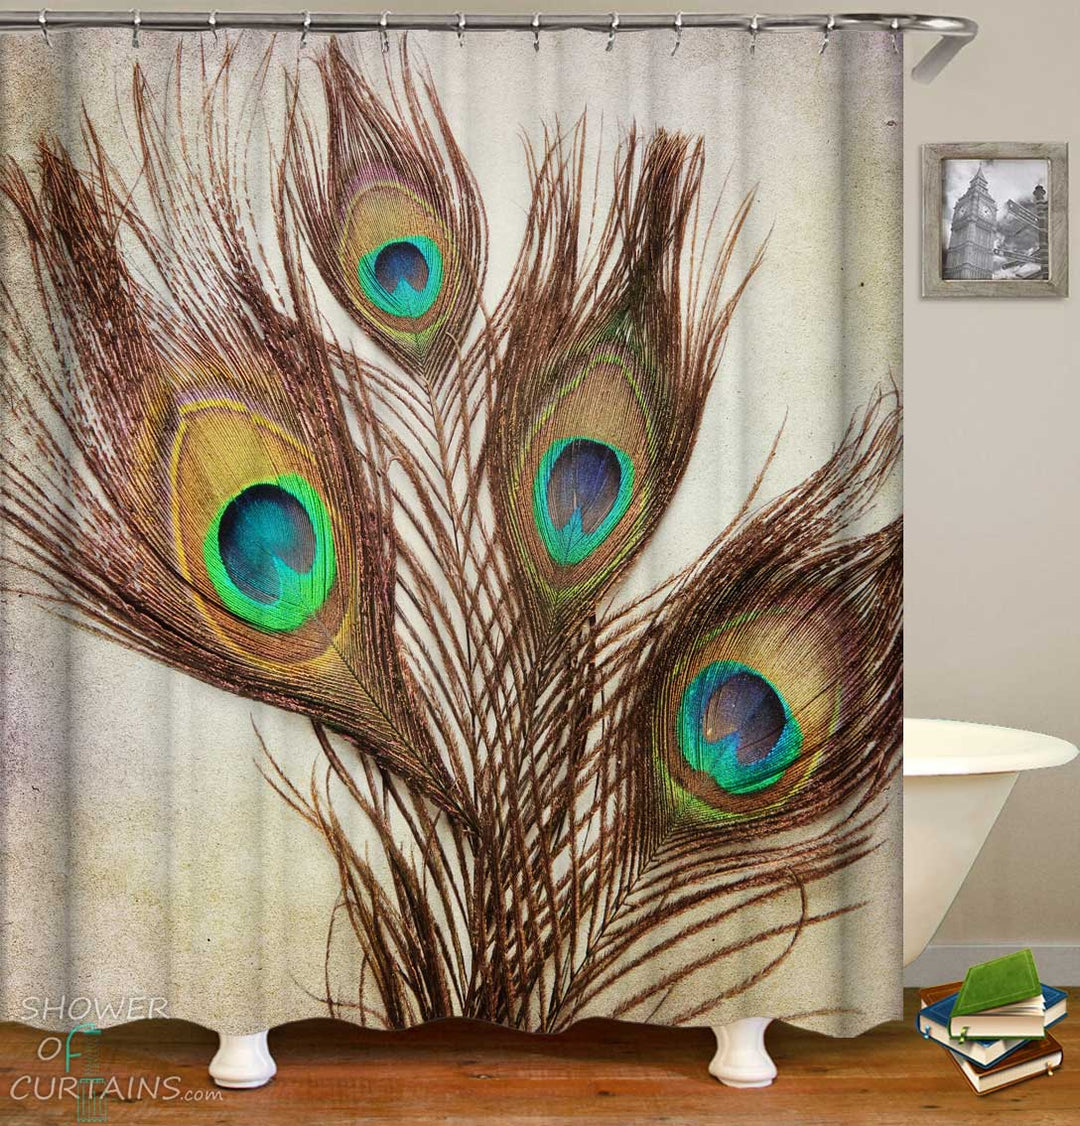 Shower Curtains with Brownish Peacock Feathers